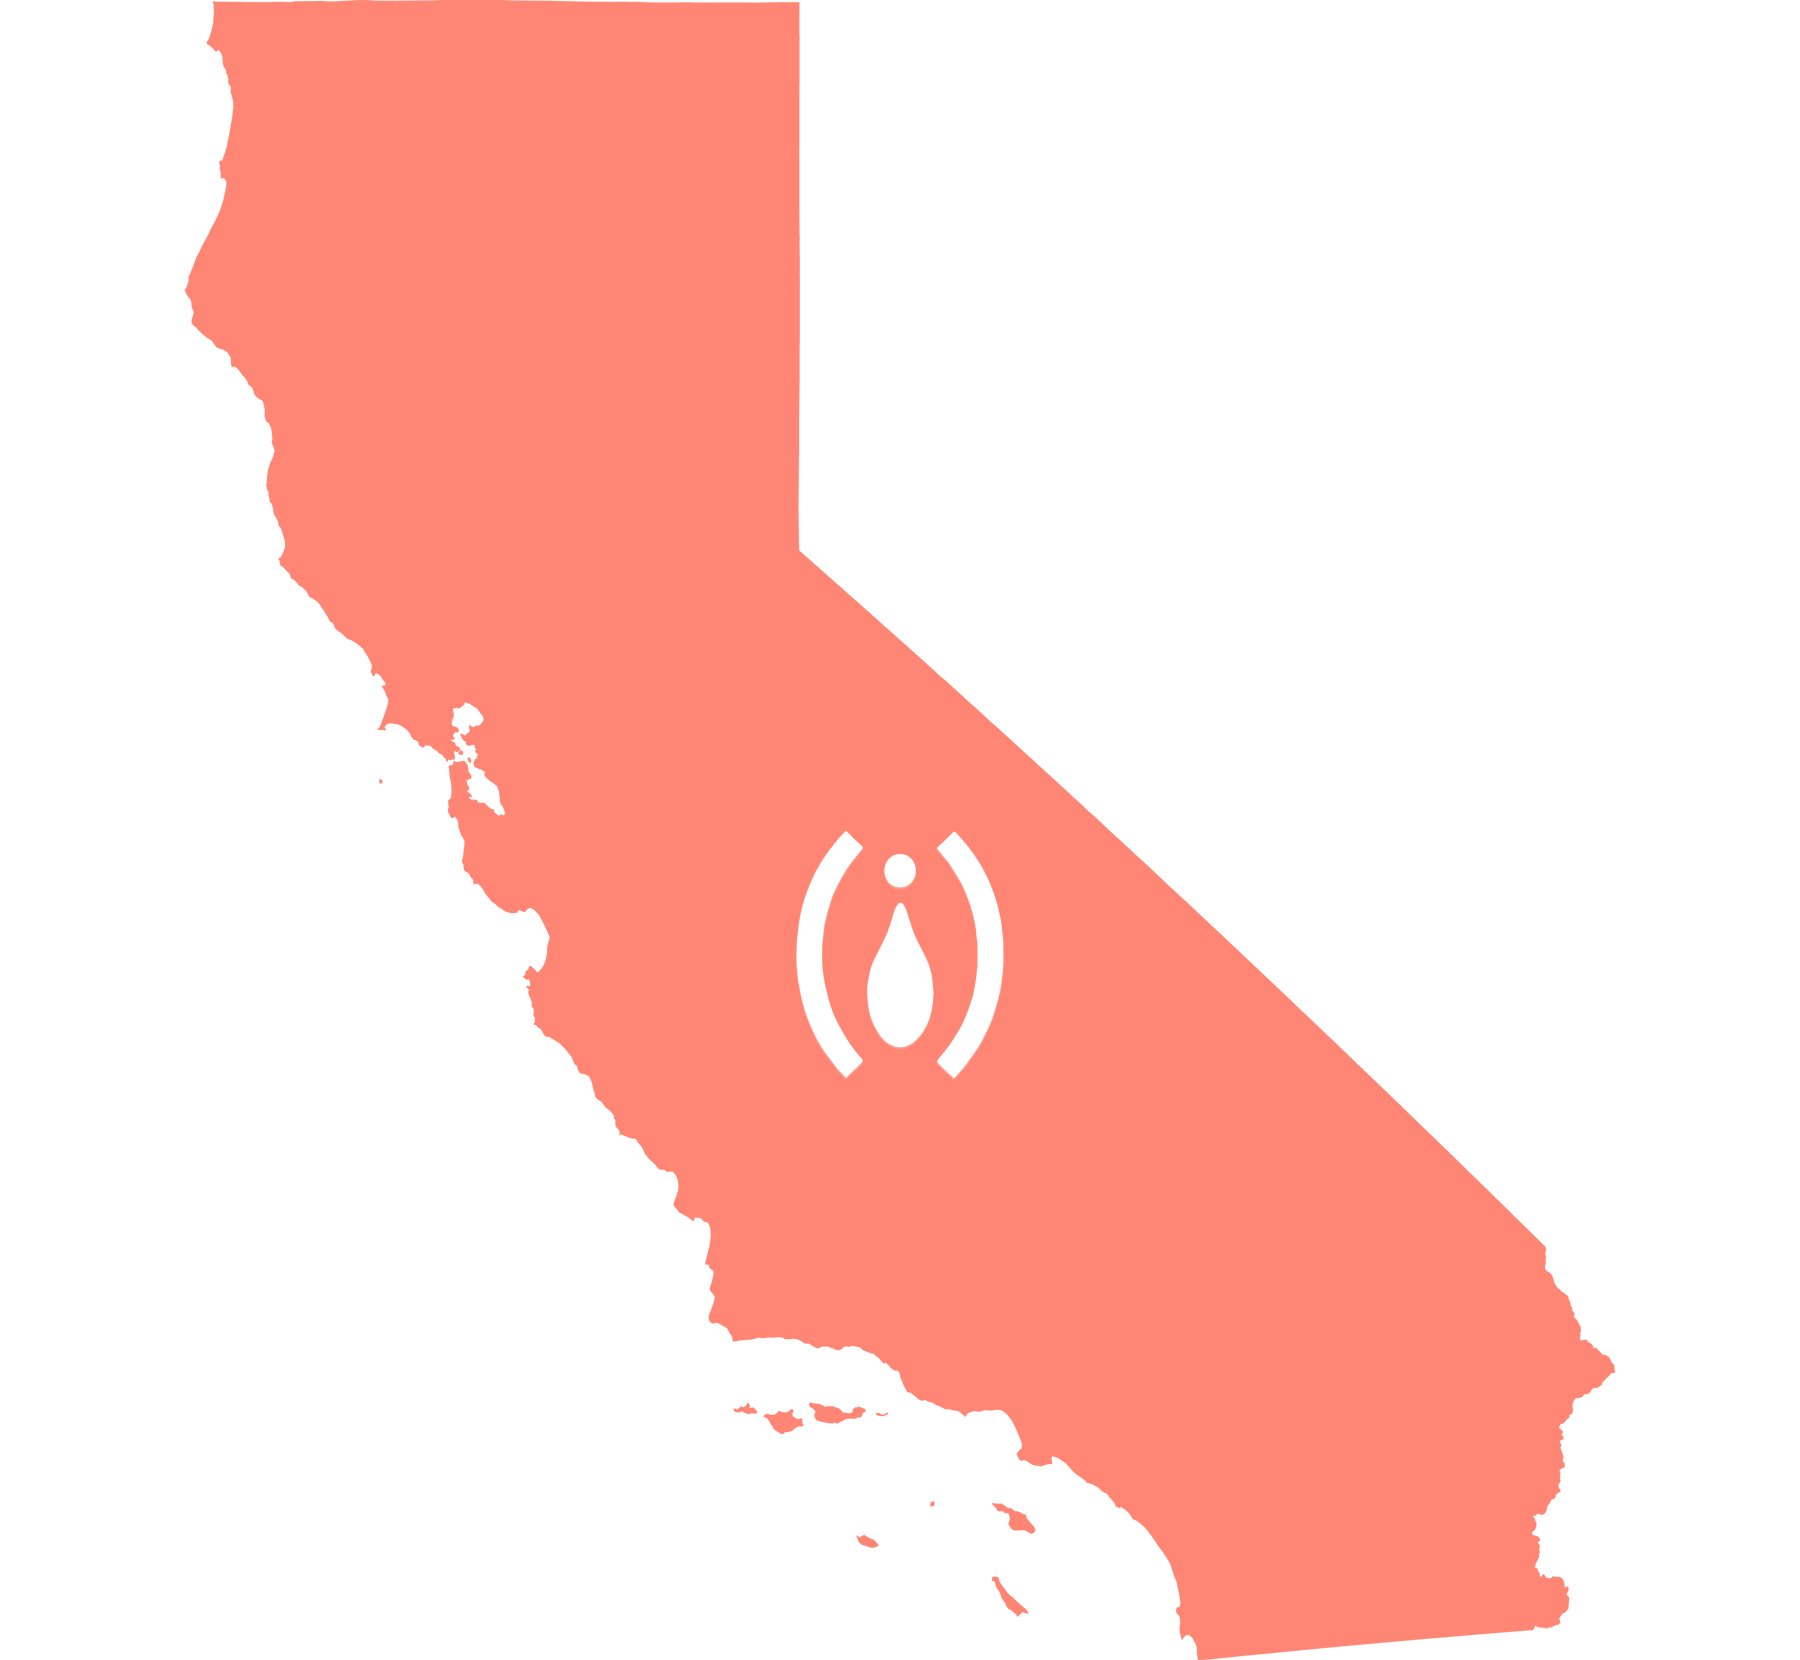 California AB 367: Menstrual Equity for All Act of 2021